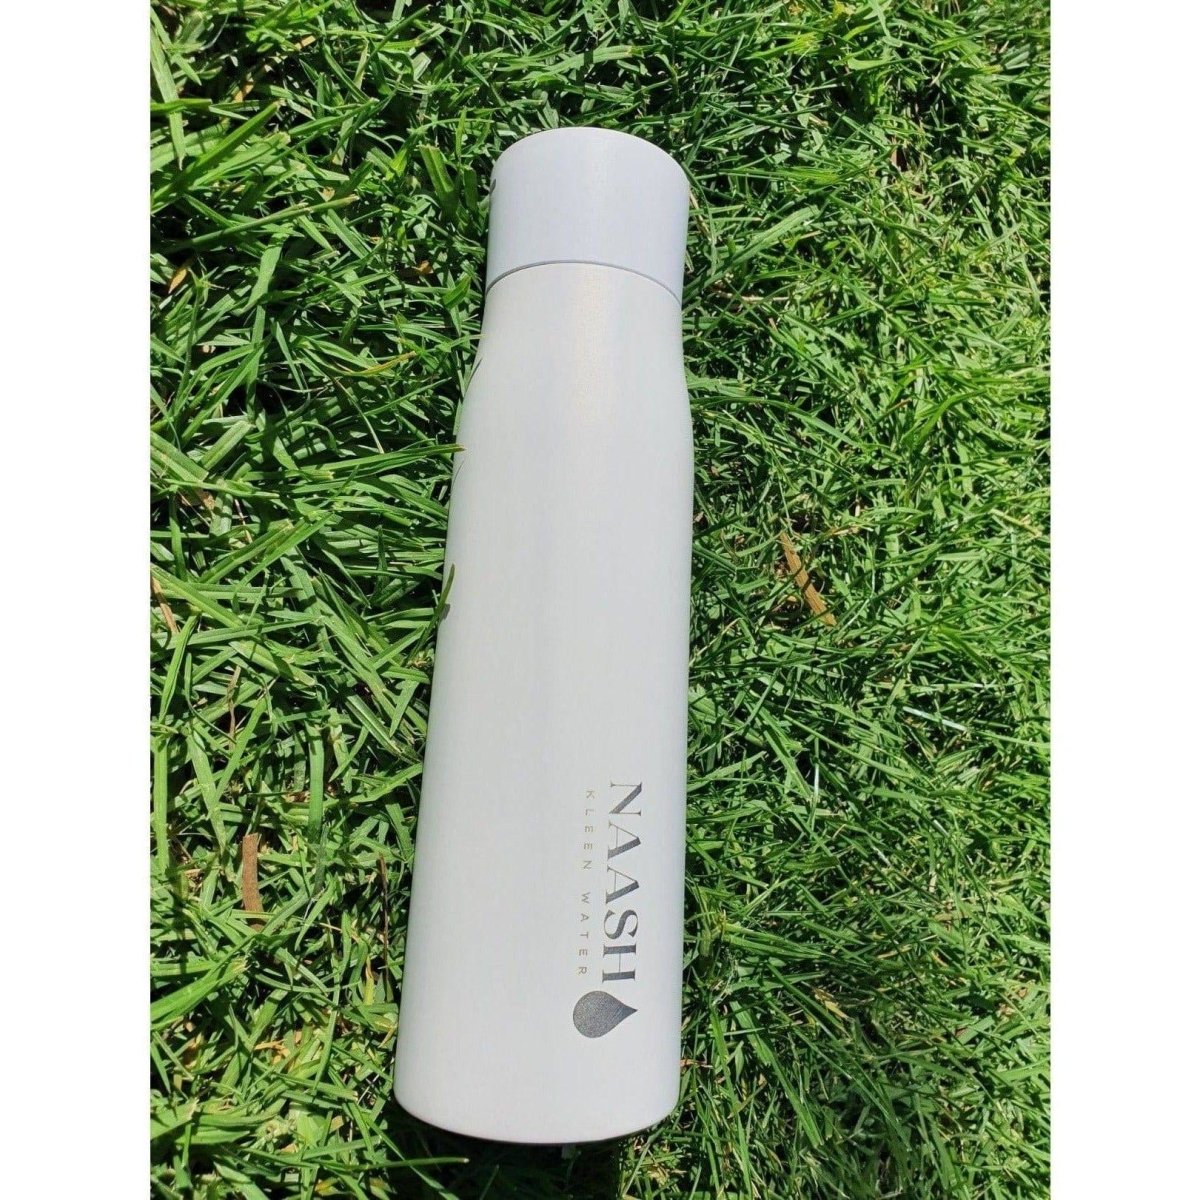 14 oz Stainless Steel Self-Cleaning Smart UV Water Bottle, White